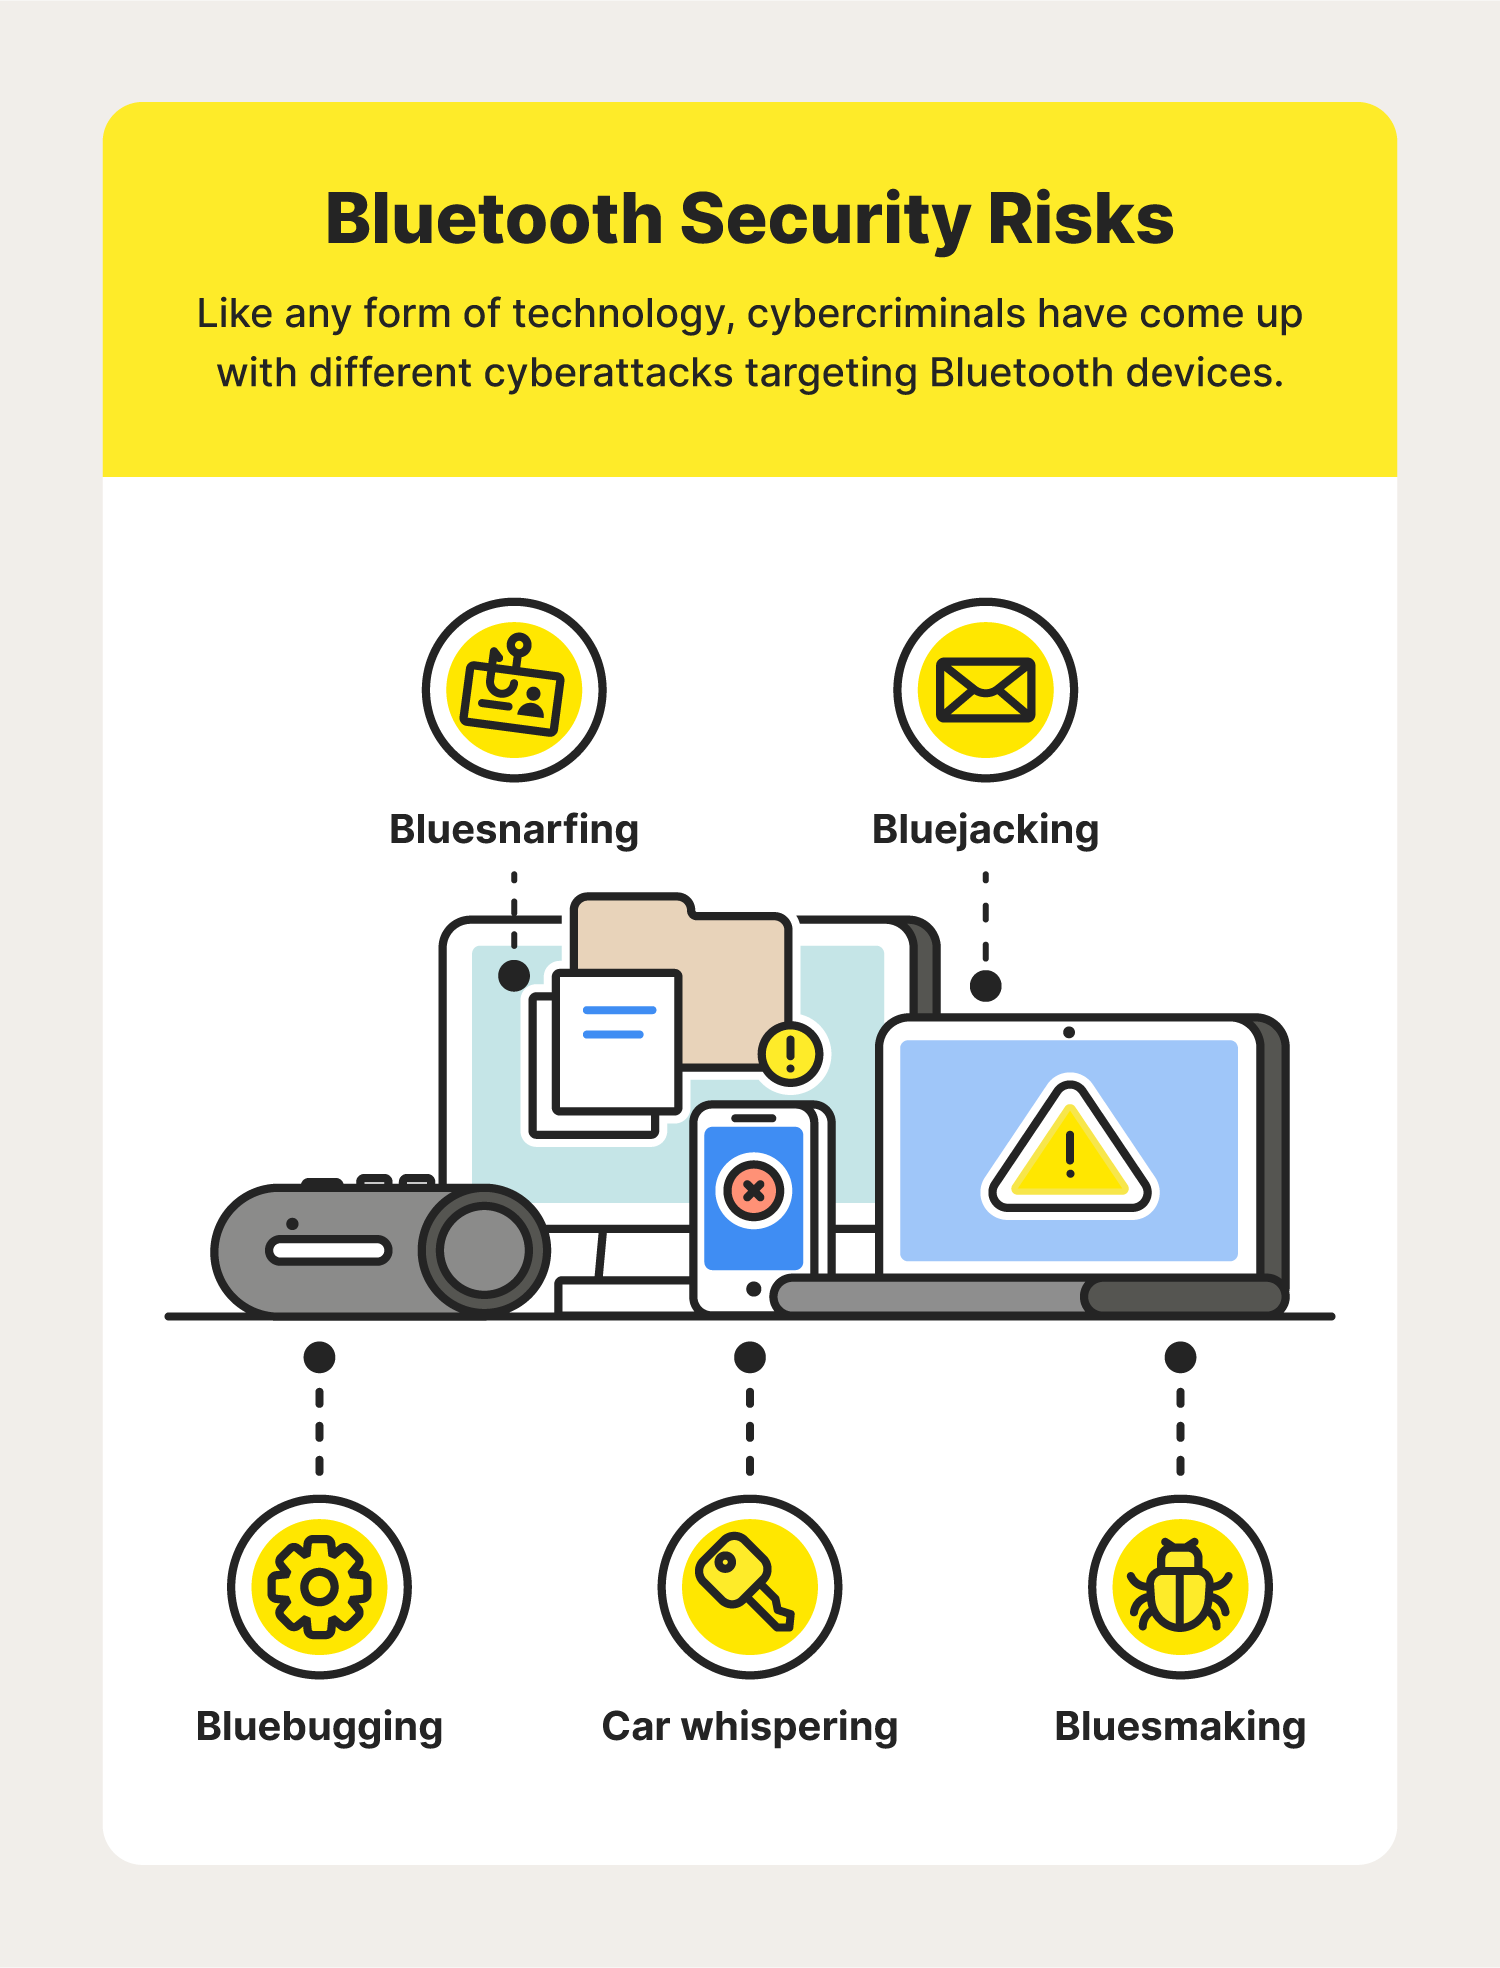 A graphic highlights different types of Bluetooth security risks.